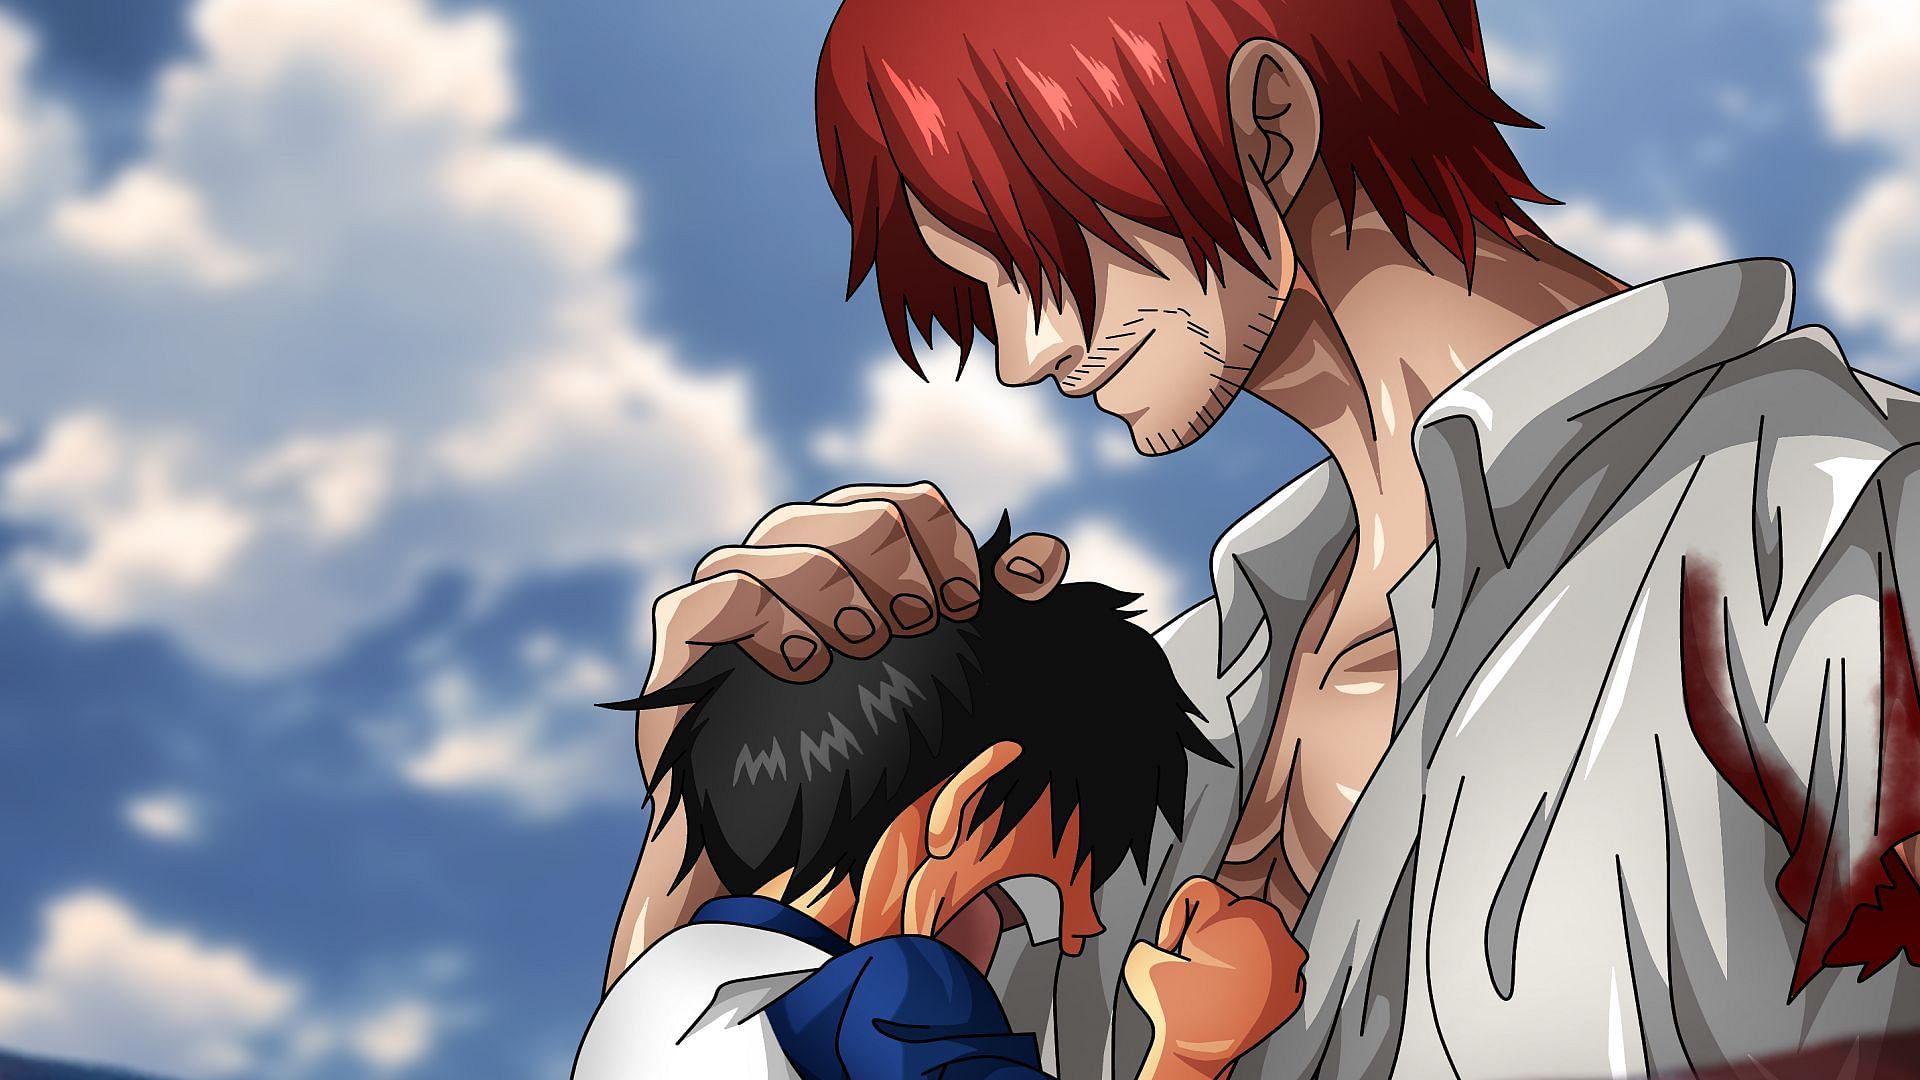 Luffy, Ace and Shanks Painting | One piece – sooqanime